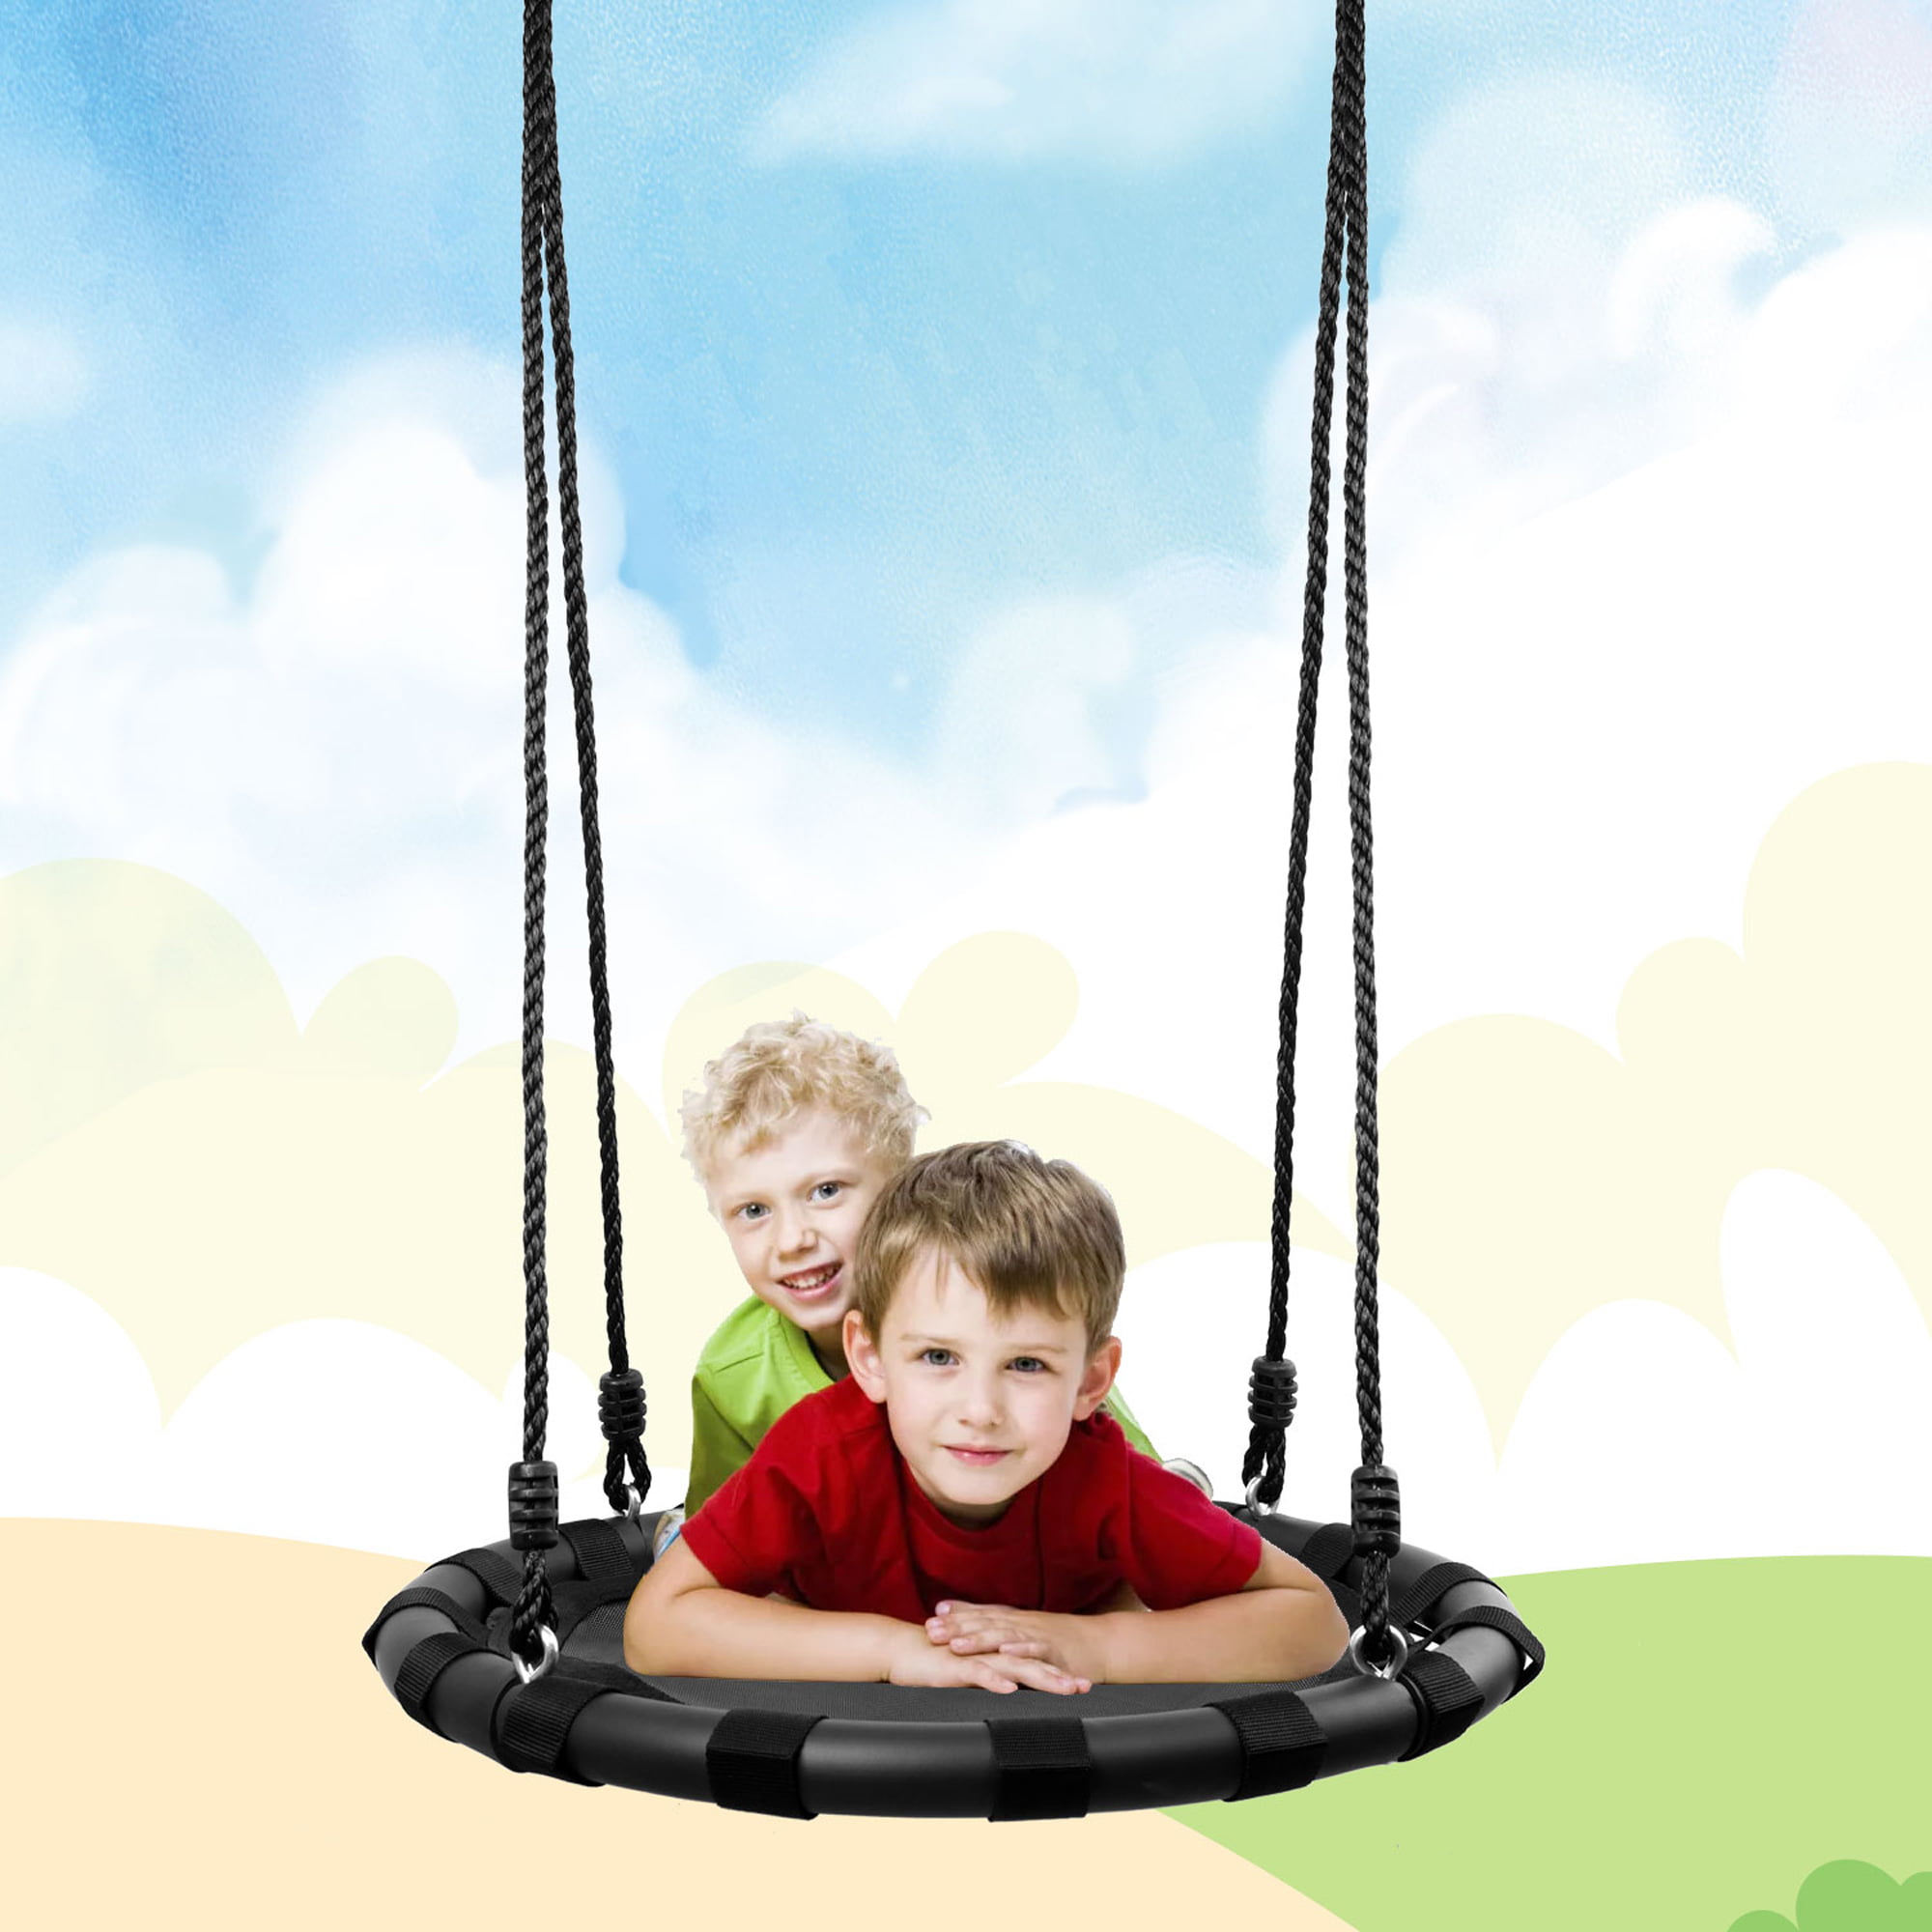 24” Tree Swing For Kids Round Swing Set with Adjustable Hanging Ropes for  Tree, Swing Set, Backyard, Playground, Playroom - Accessories Included 